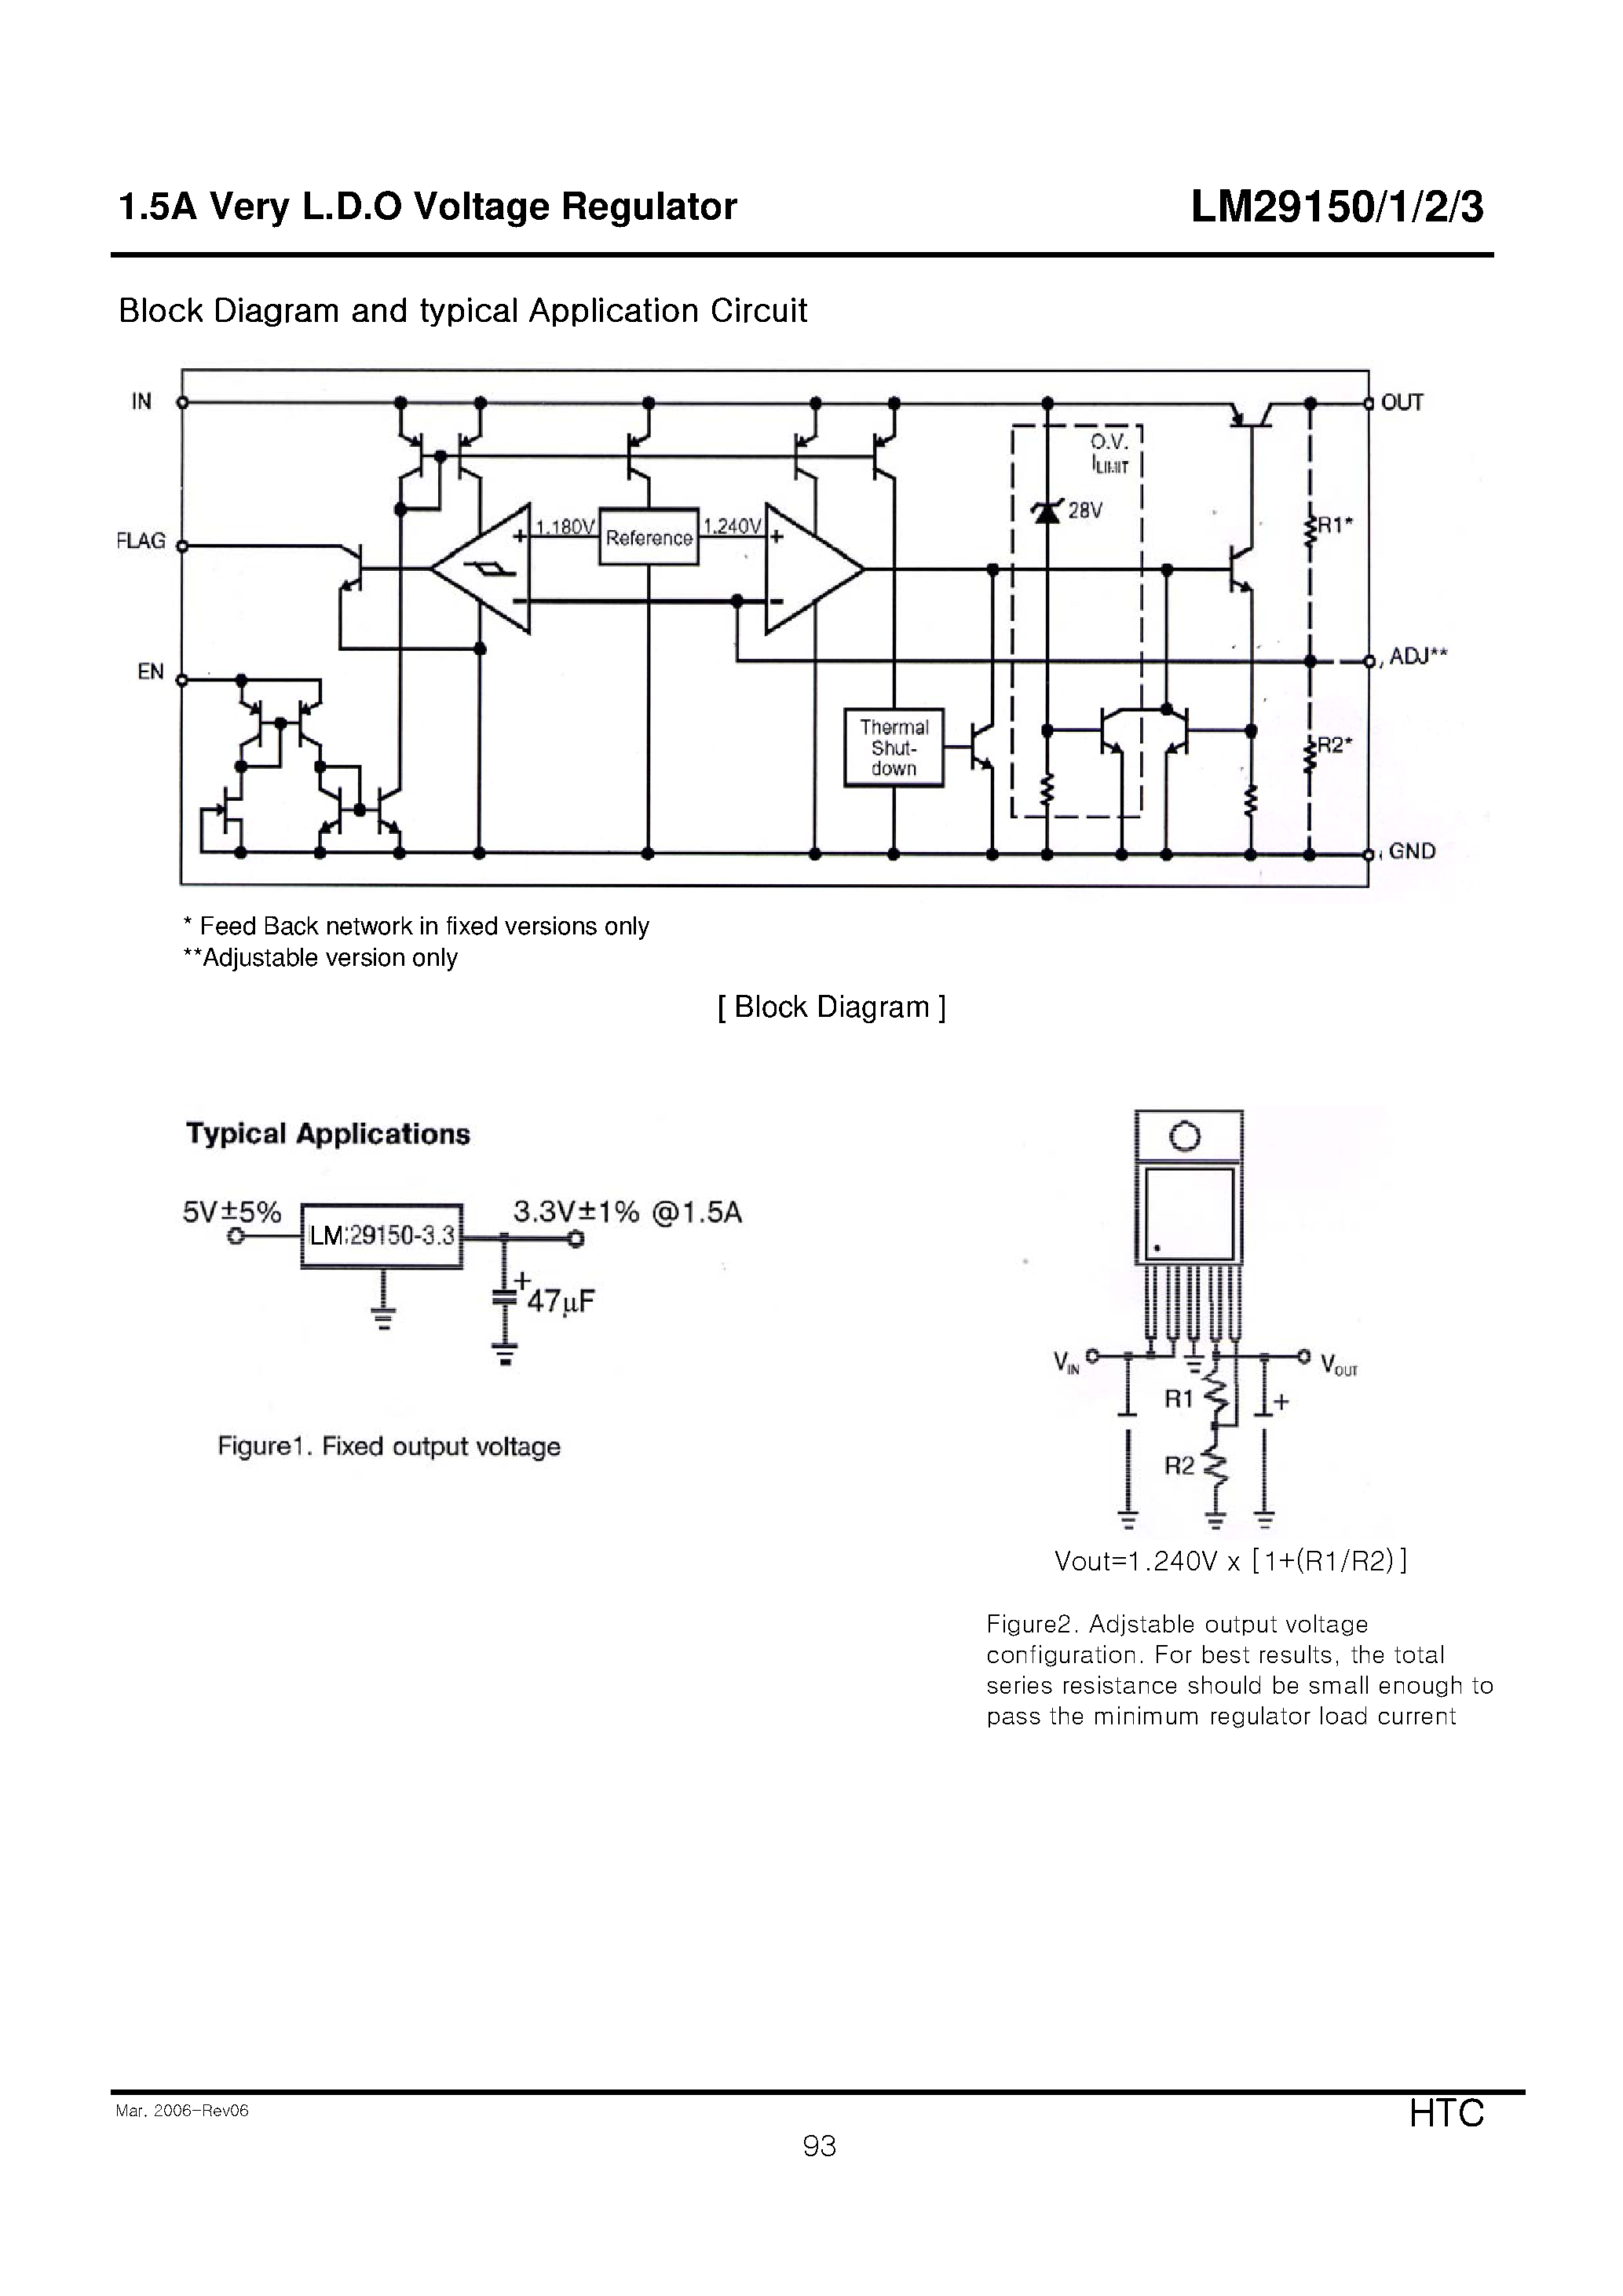 Datasheet LM29150 - (LM29150 - LM29153) 1.5A Very L.D.O Voltage Regulator page 2